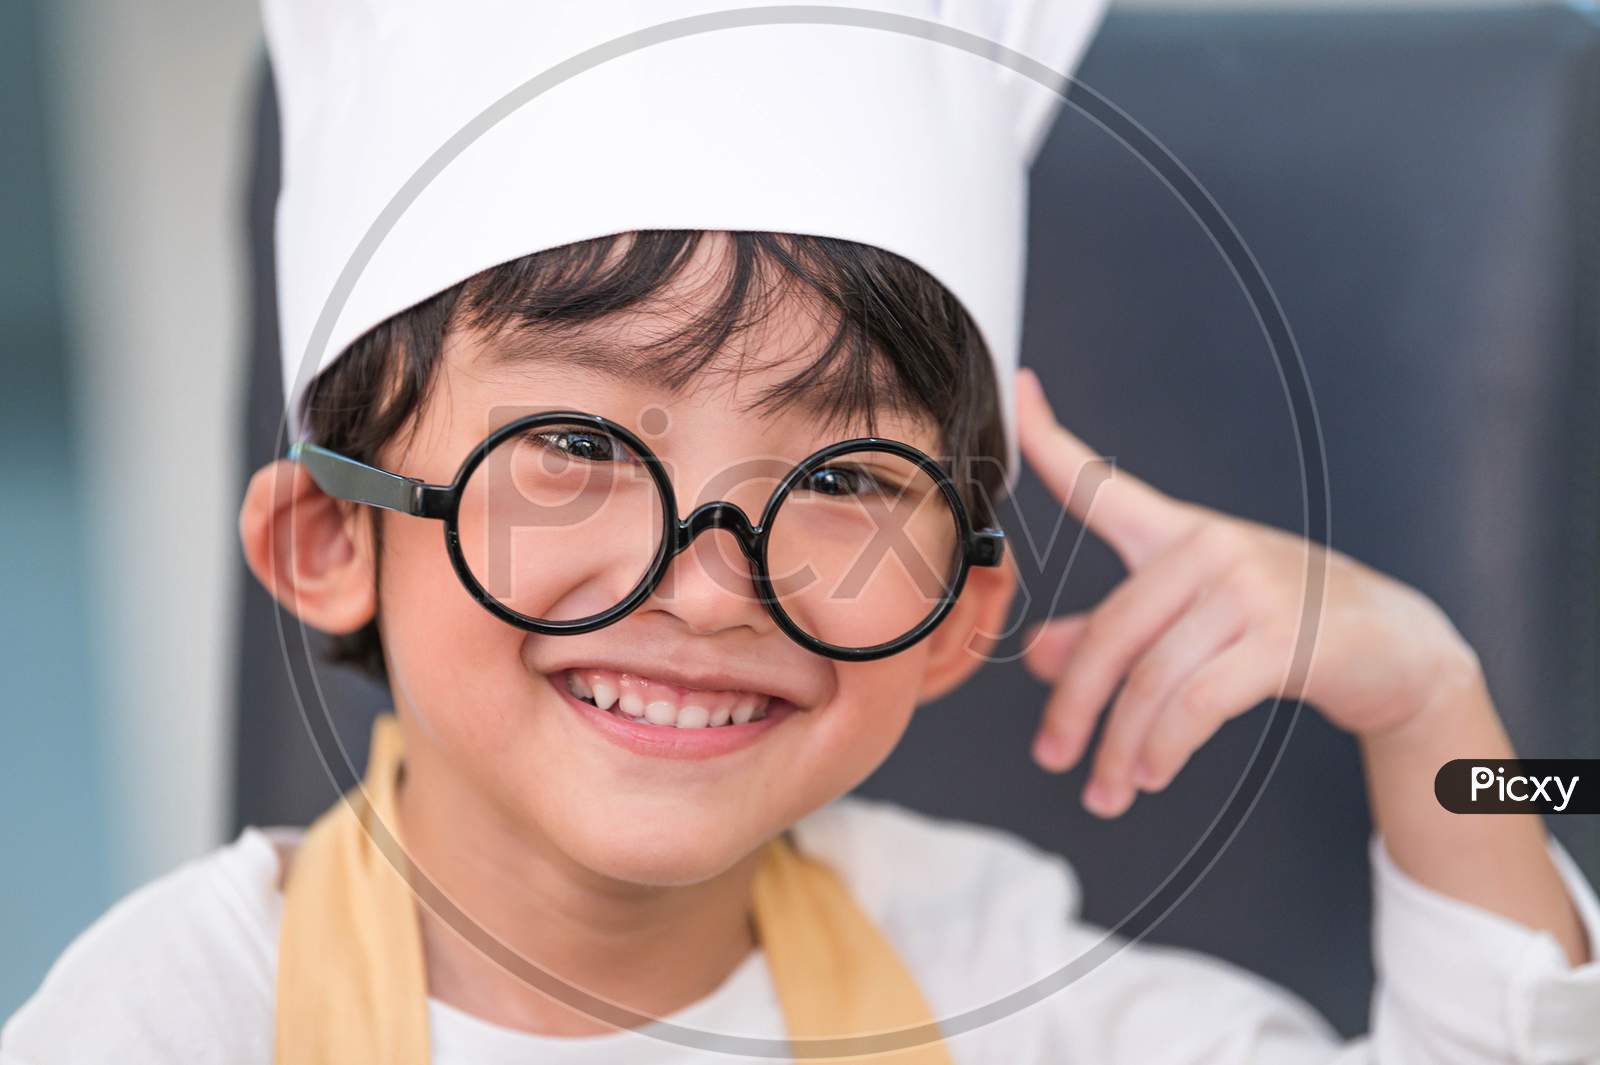 Portrait Cute Little Asian Happiness Boy Interested In Cooking With Mother Funny In Home Kitchen. People Lifestyles And Family. Homemade Food And Ingredients Concept. Baking Christmas Cake And Cookies